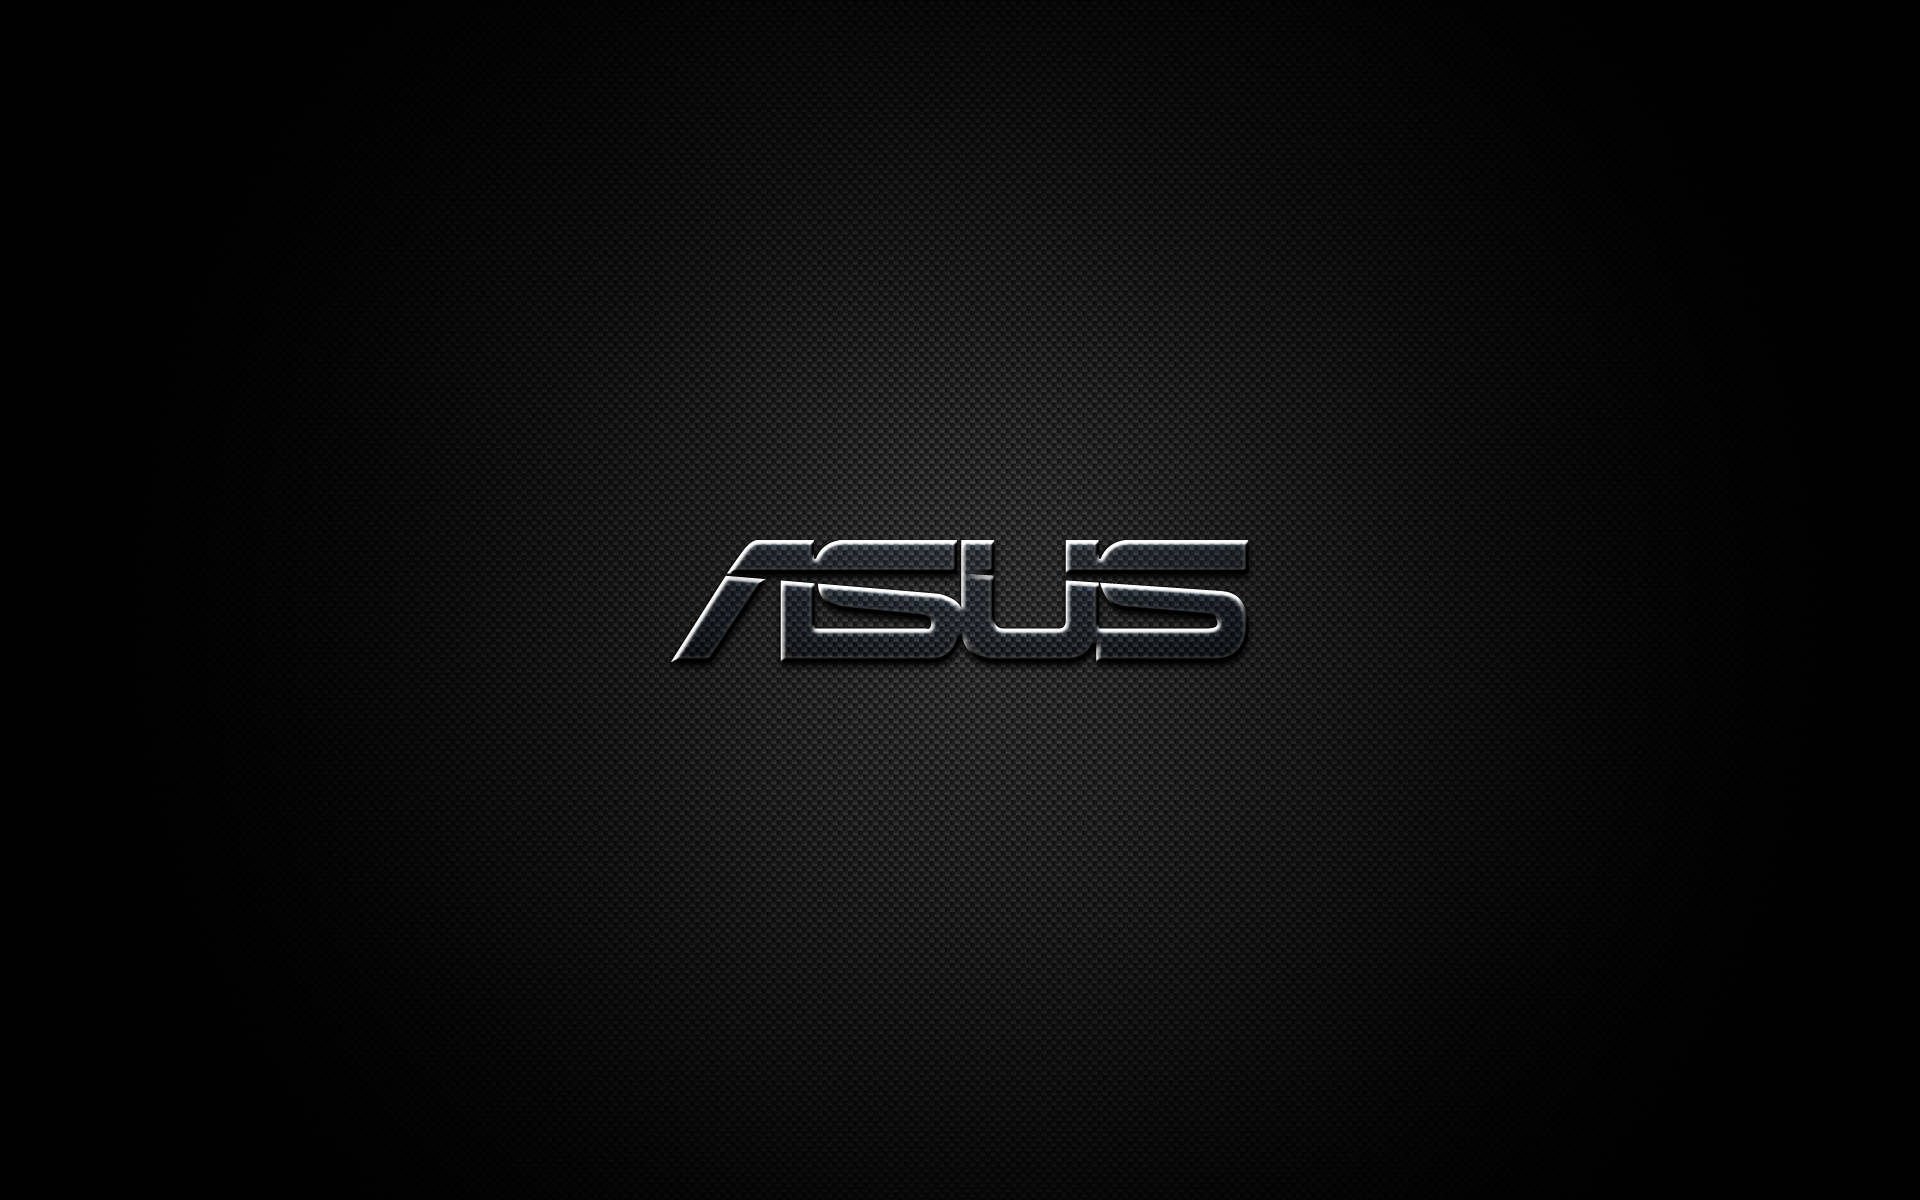 Asus 1920X1200 Wallpaper and Background Image